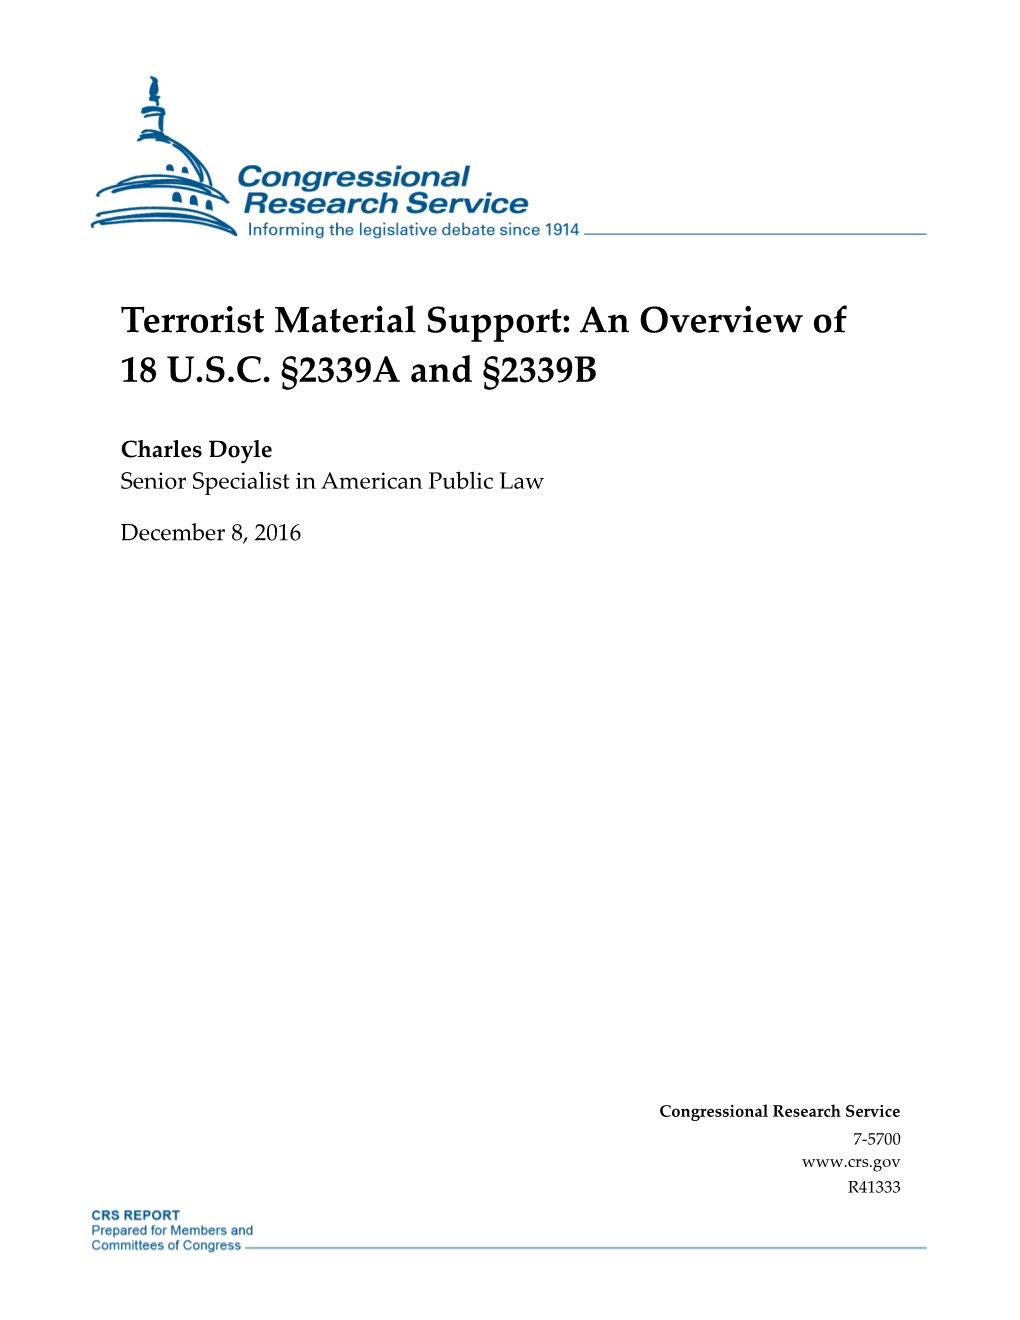 Terrorist Material Support: an Overview of 18 U.S.C. §2339A and §2339B